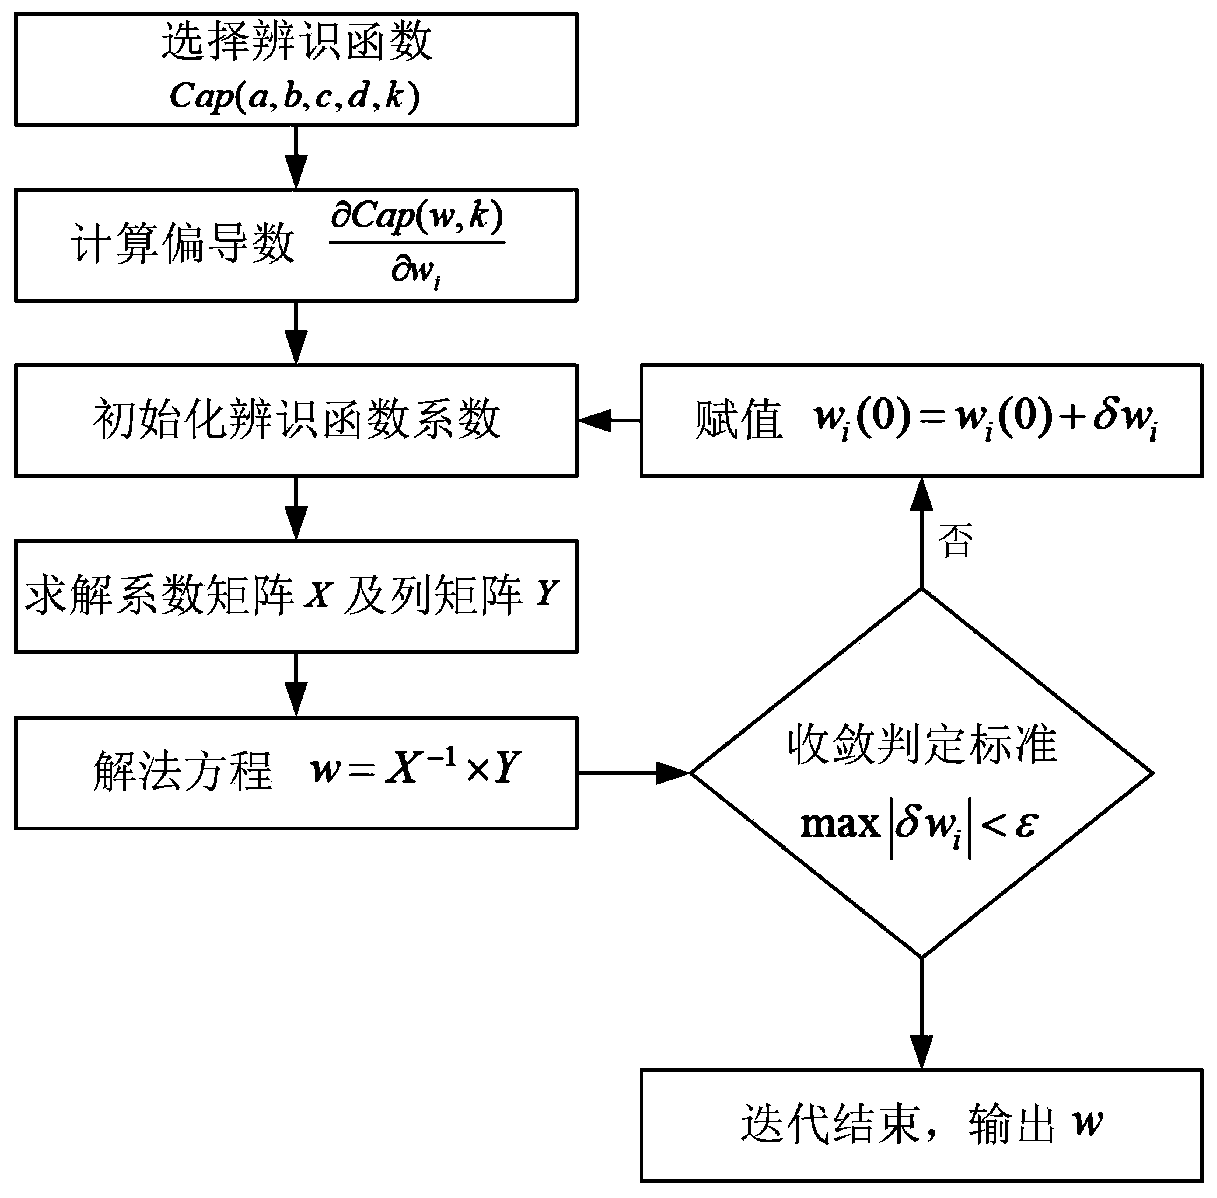 Lithium ion battery residual life prediction method based on fusion of improved particle filtering and double-exponential recession empirical physical model